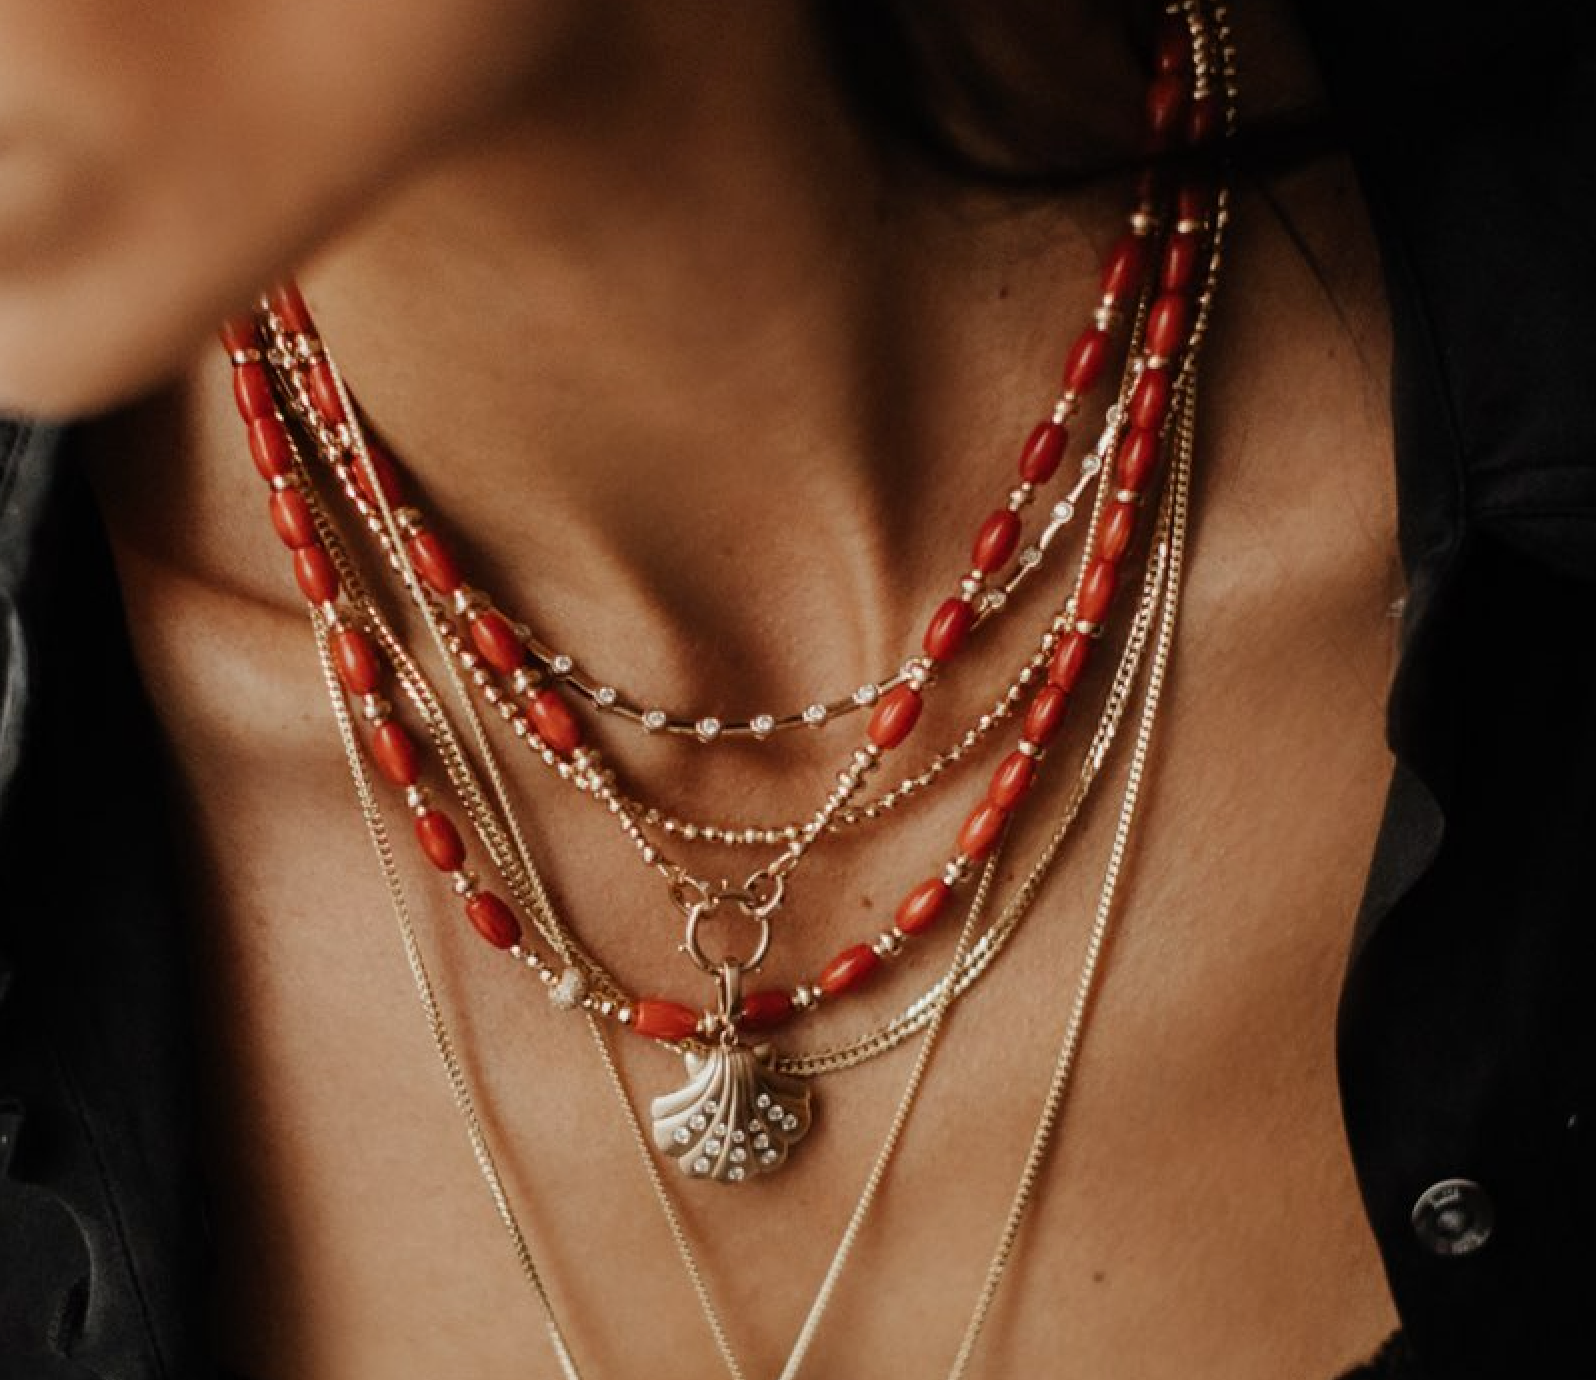 RED CORAL NECKLACES